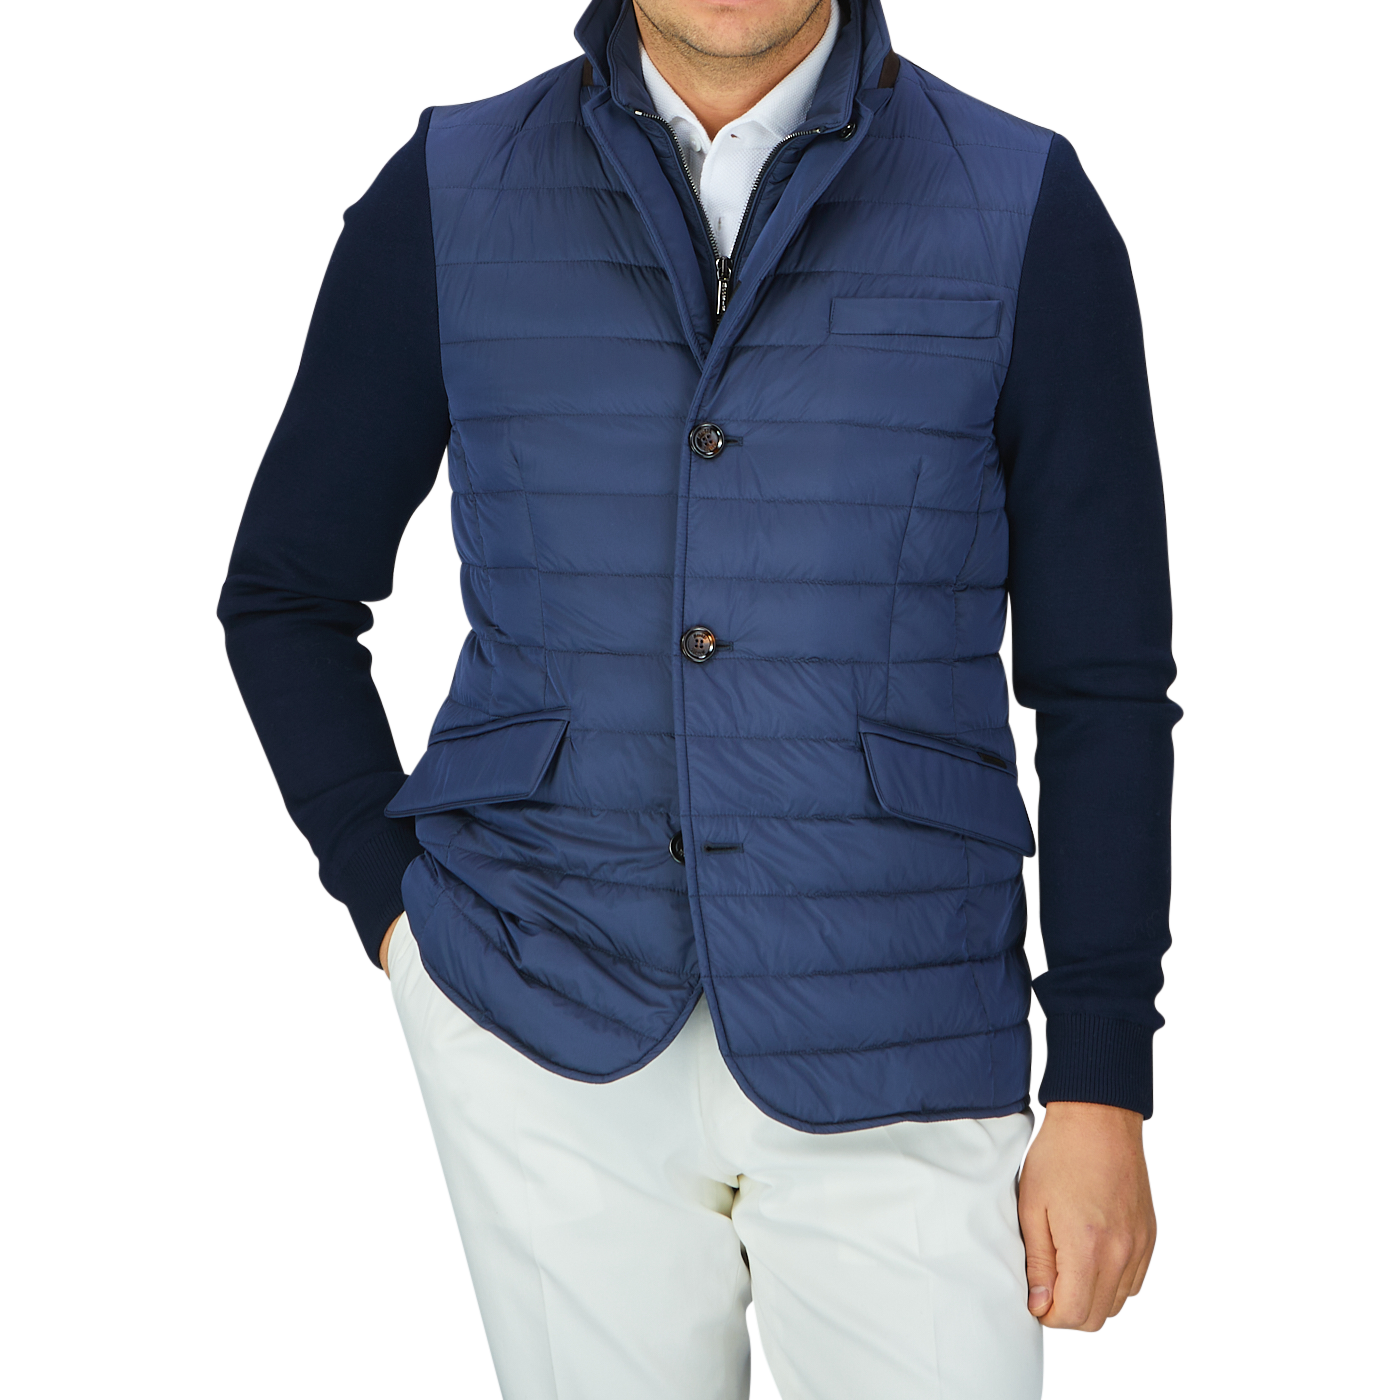 A man wearing a Moorer Ocean Blue Nylon Knitted Sleeve Jacket and white pants.